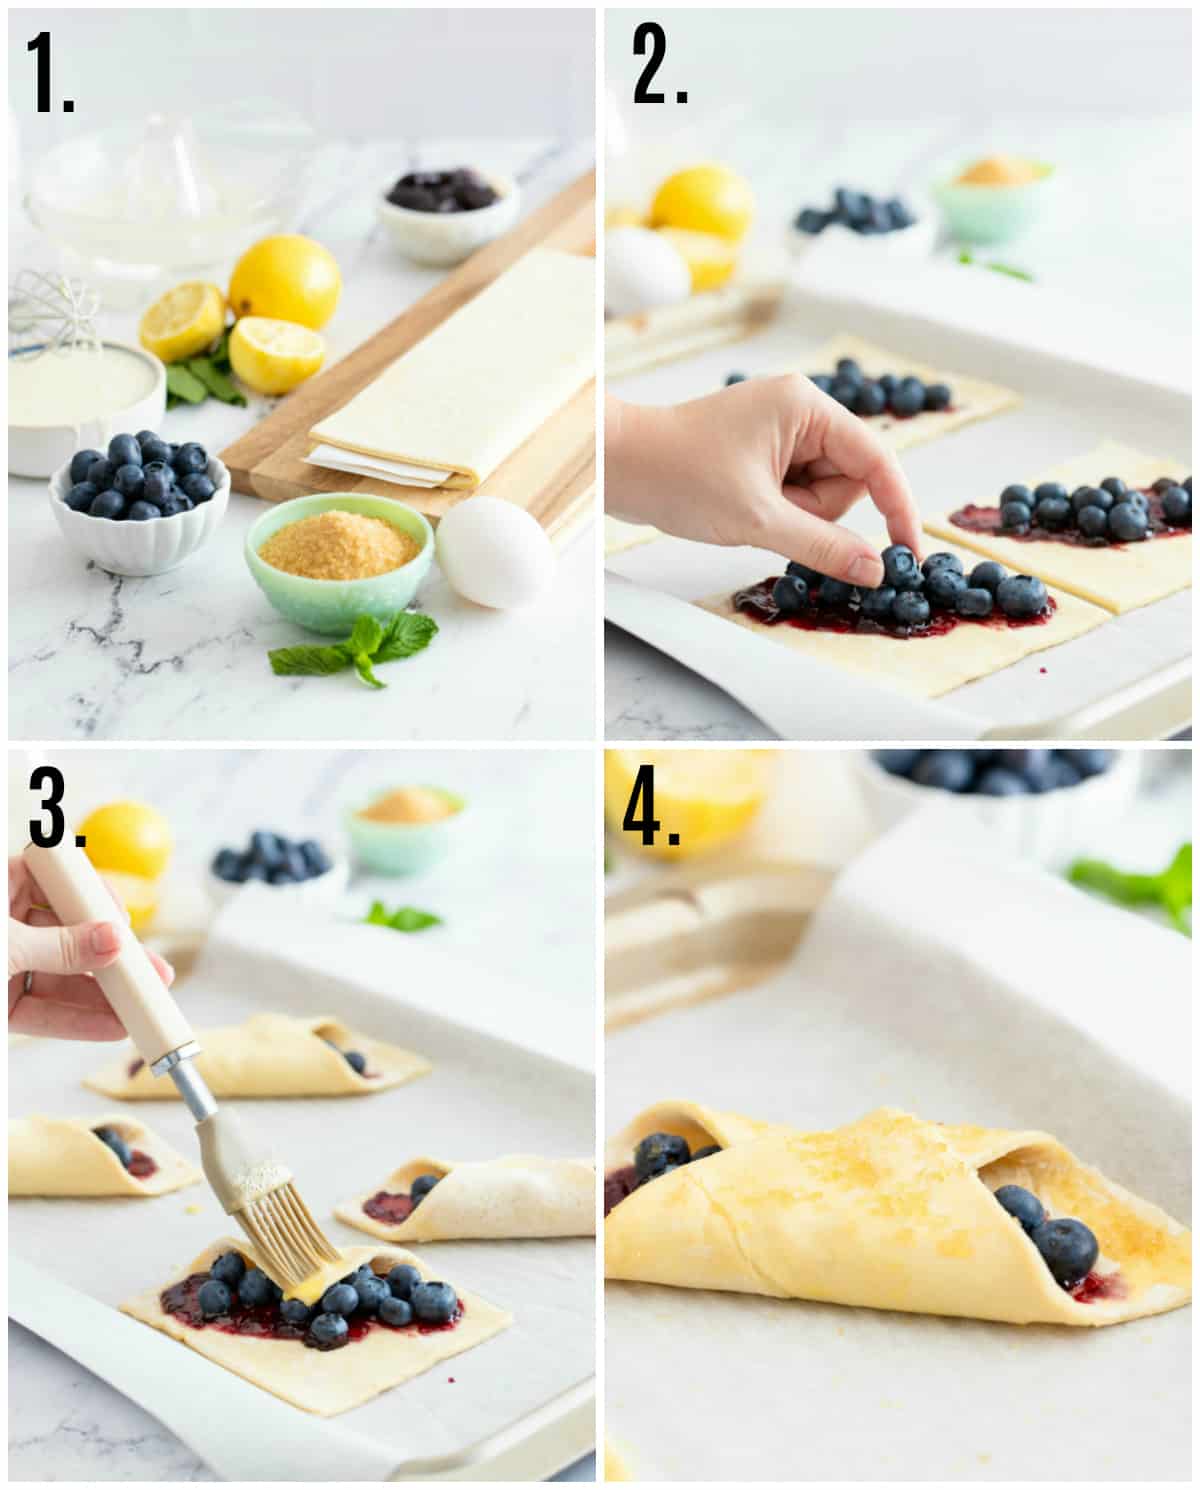 Step by step photos on how to make Danishes